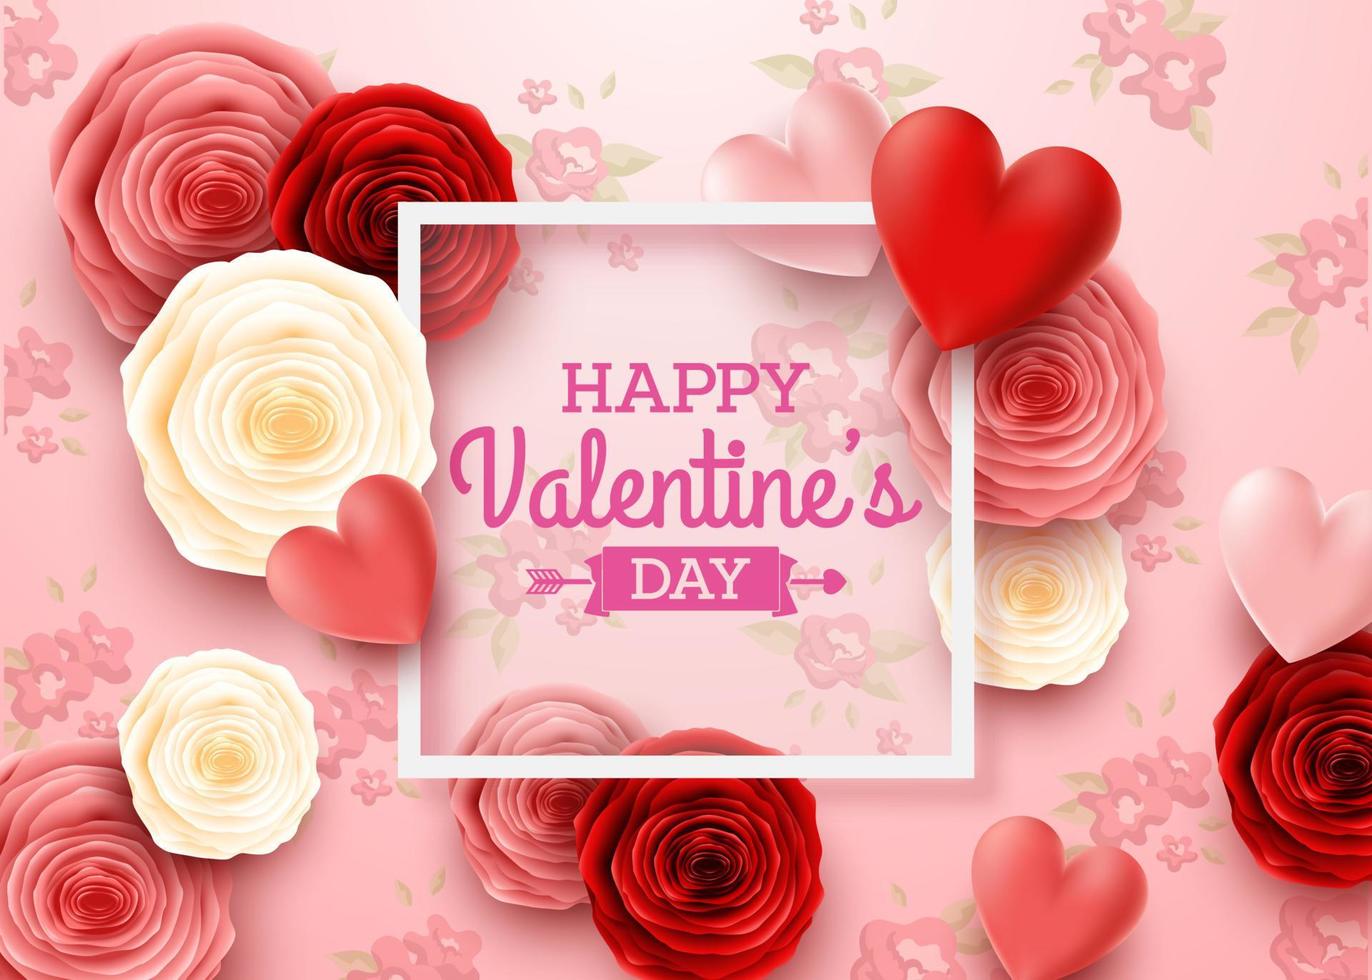 Valentines day greeting card with rose flower and hearts background vector